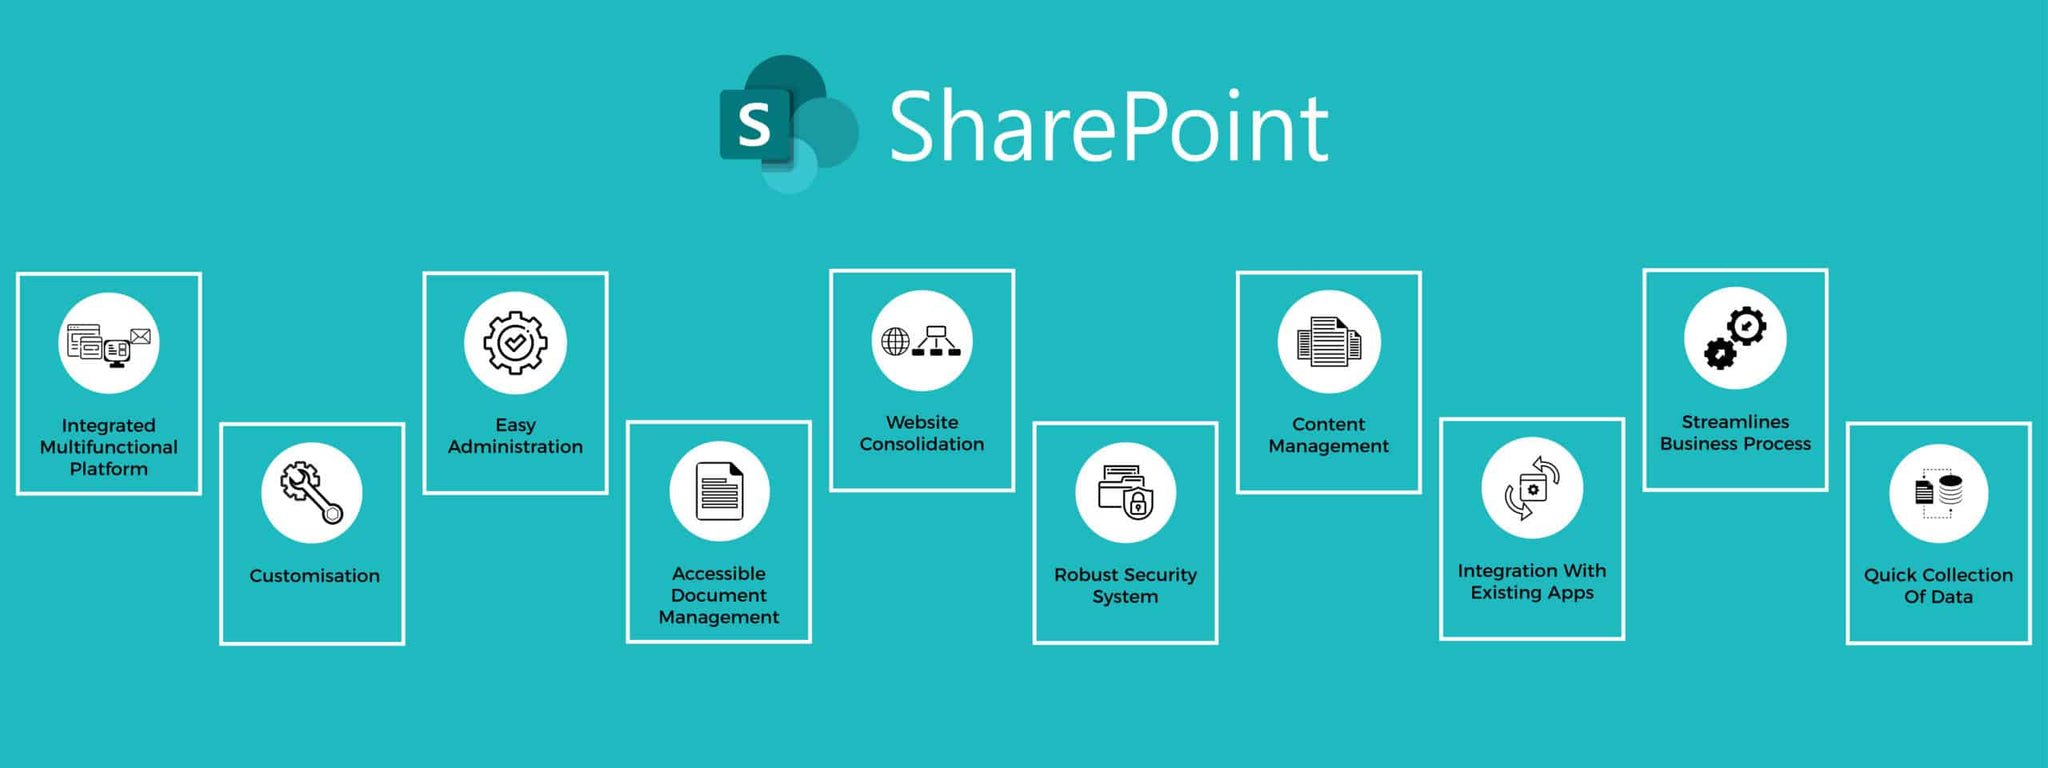 What Are The Benefits Of Sharepoint?